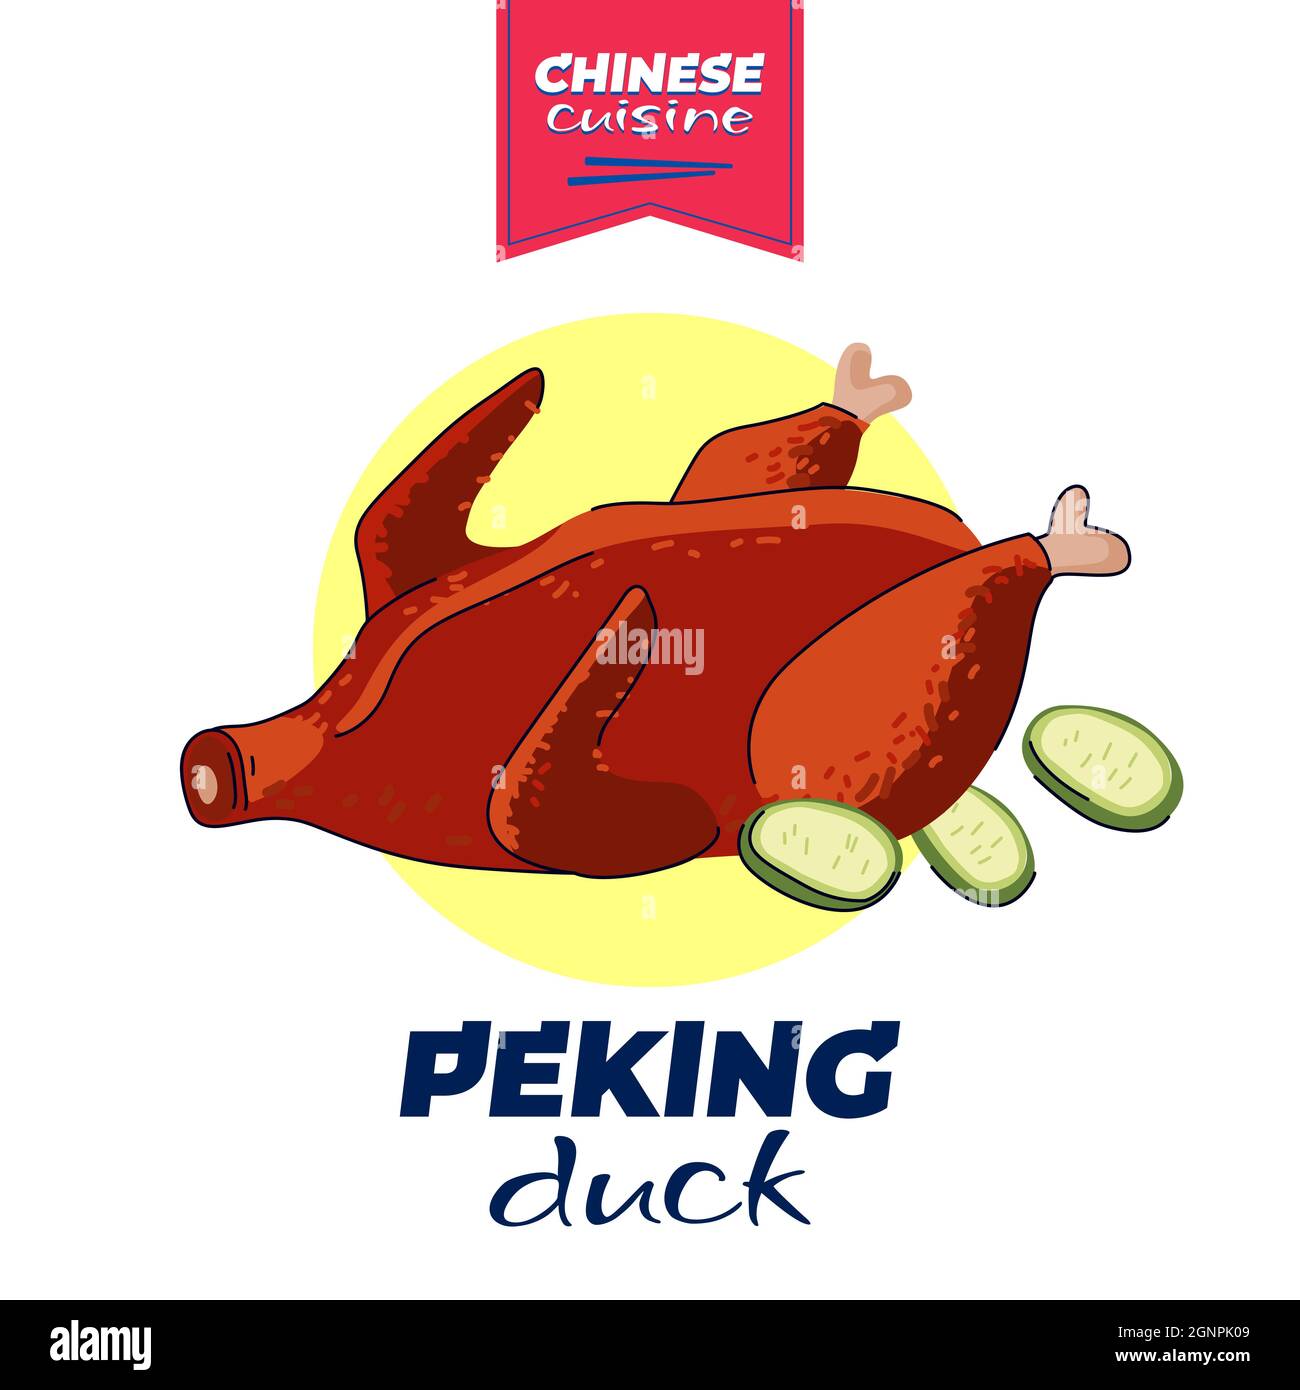 Chinese cuisine peking duck banner concept. China national dish roasted beijing spicy meat. Asian food vector eps hand drawn art illustration for oriental cafe or restaurant advertising Stock Vector